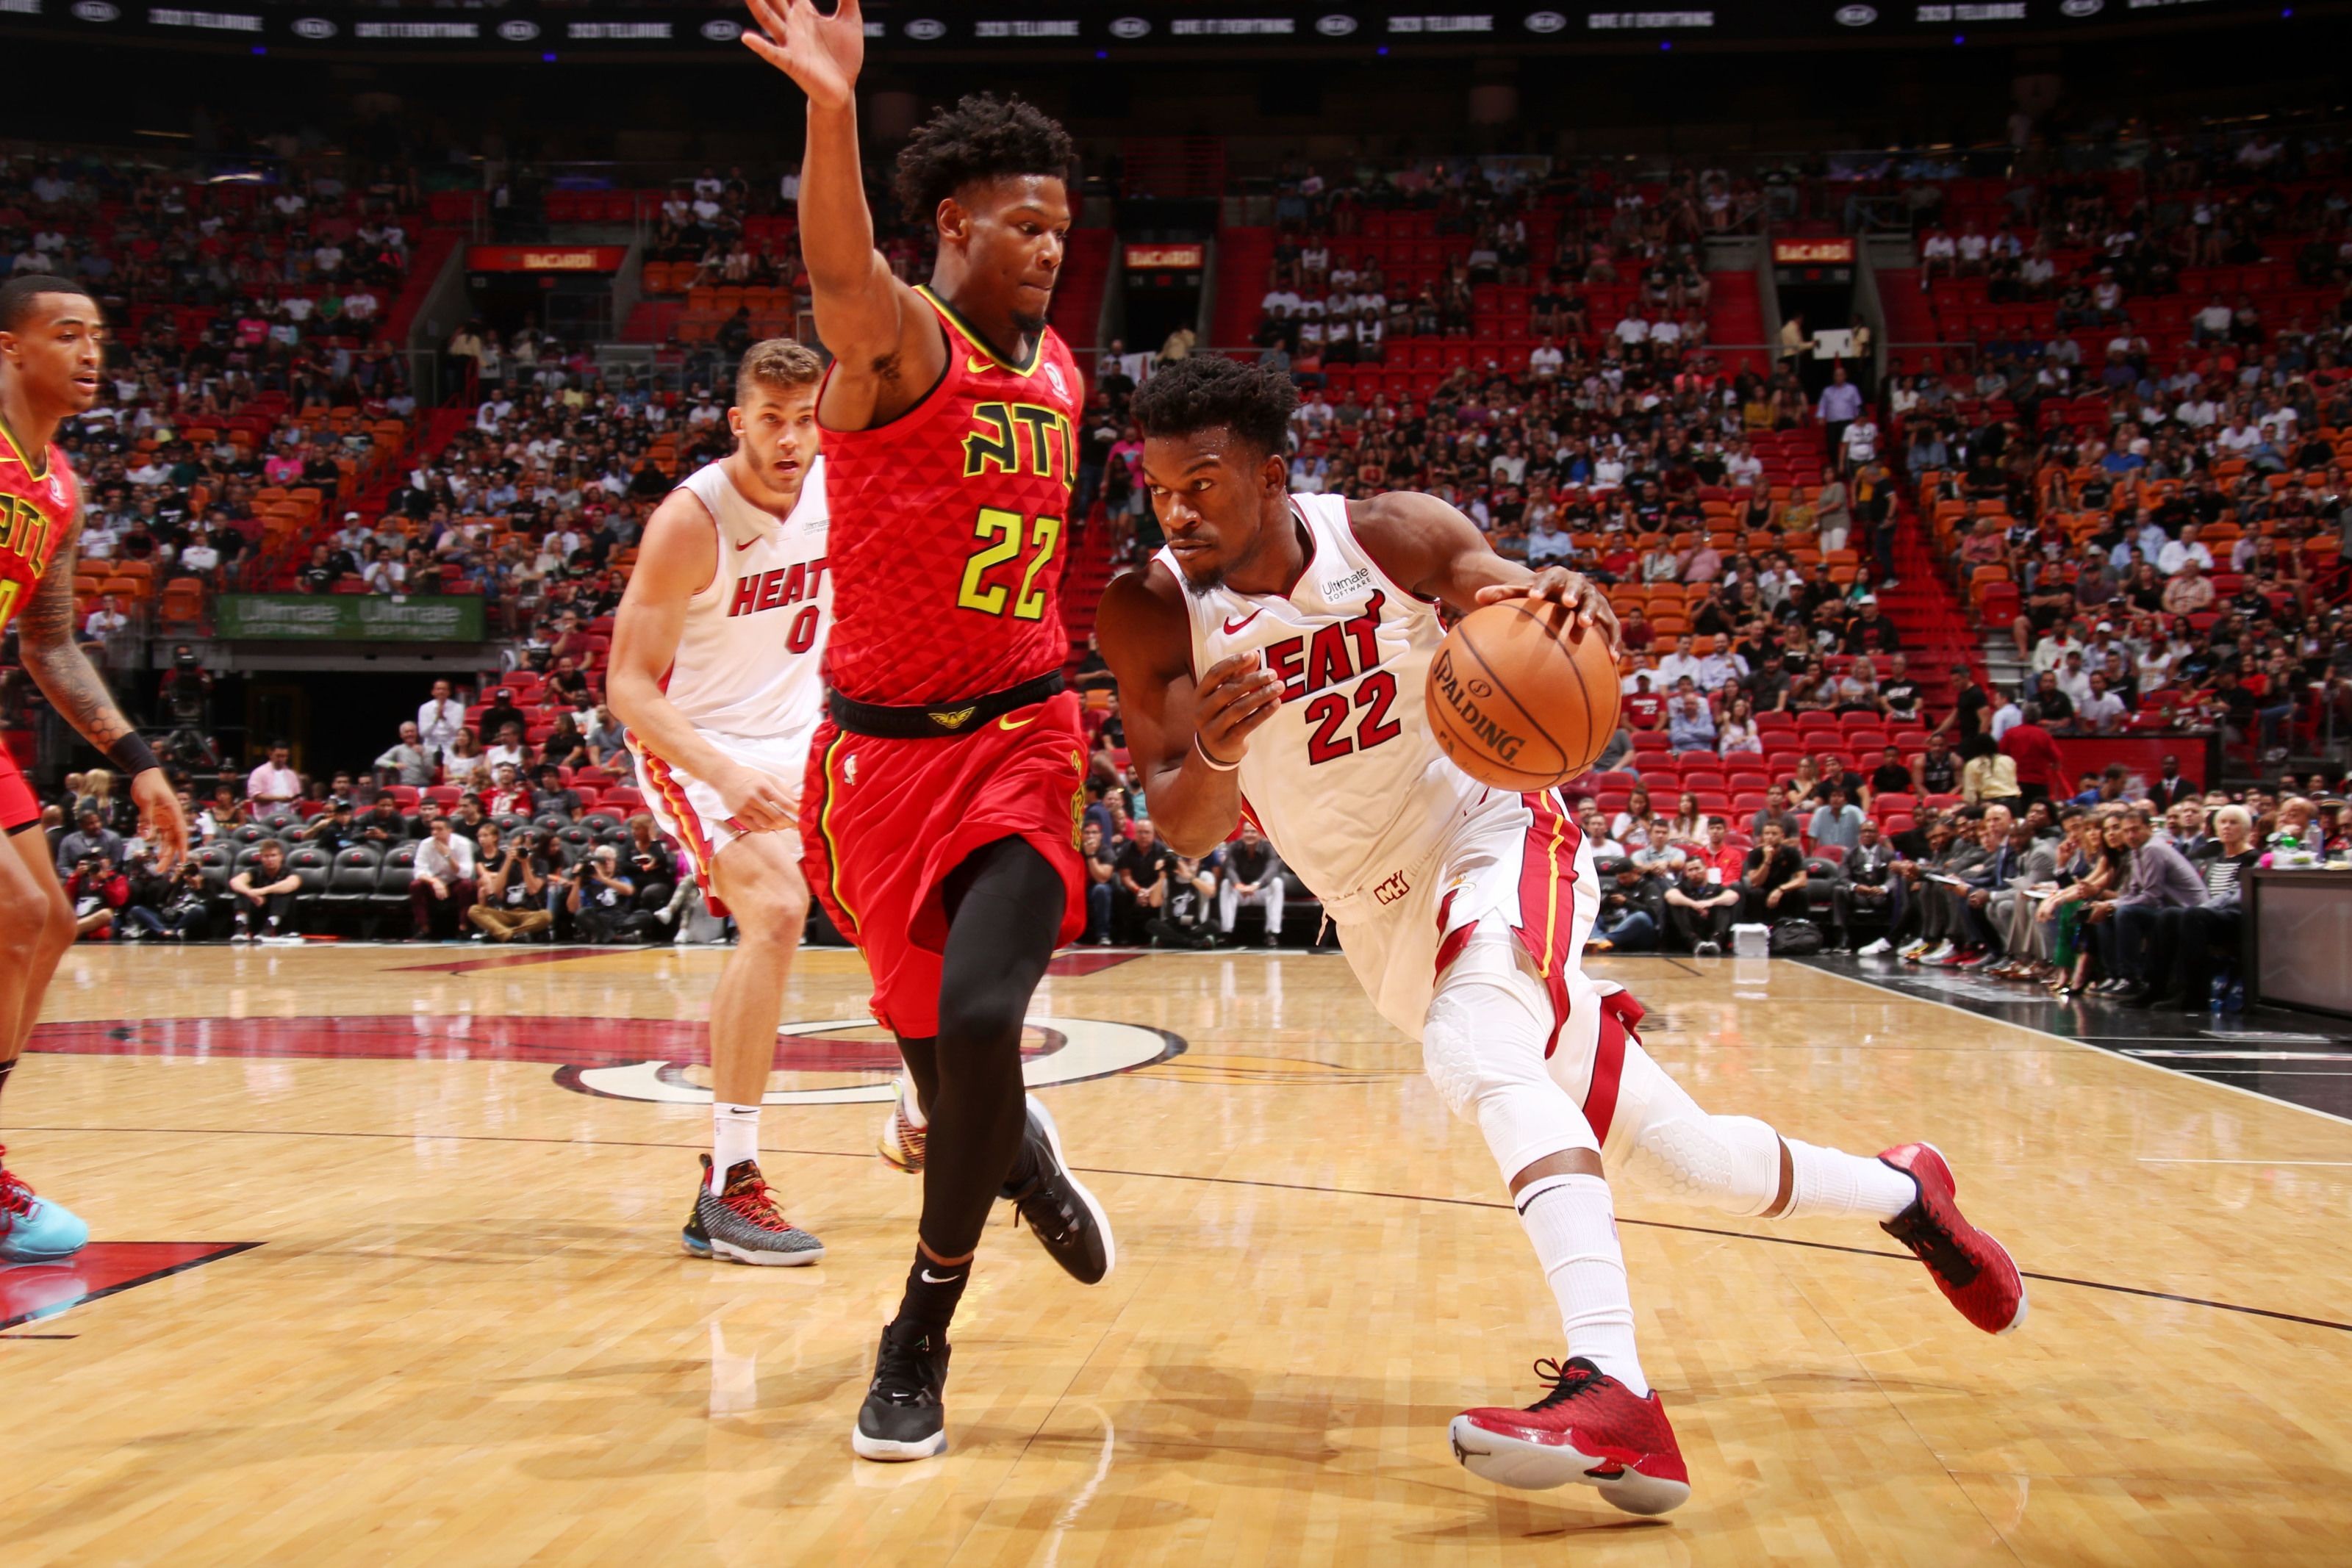 Miami Heat: Jimmy Butler scores 21 during his debut game in South Beach